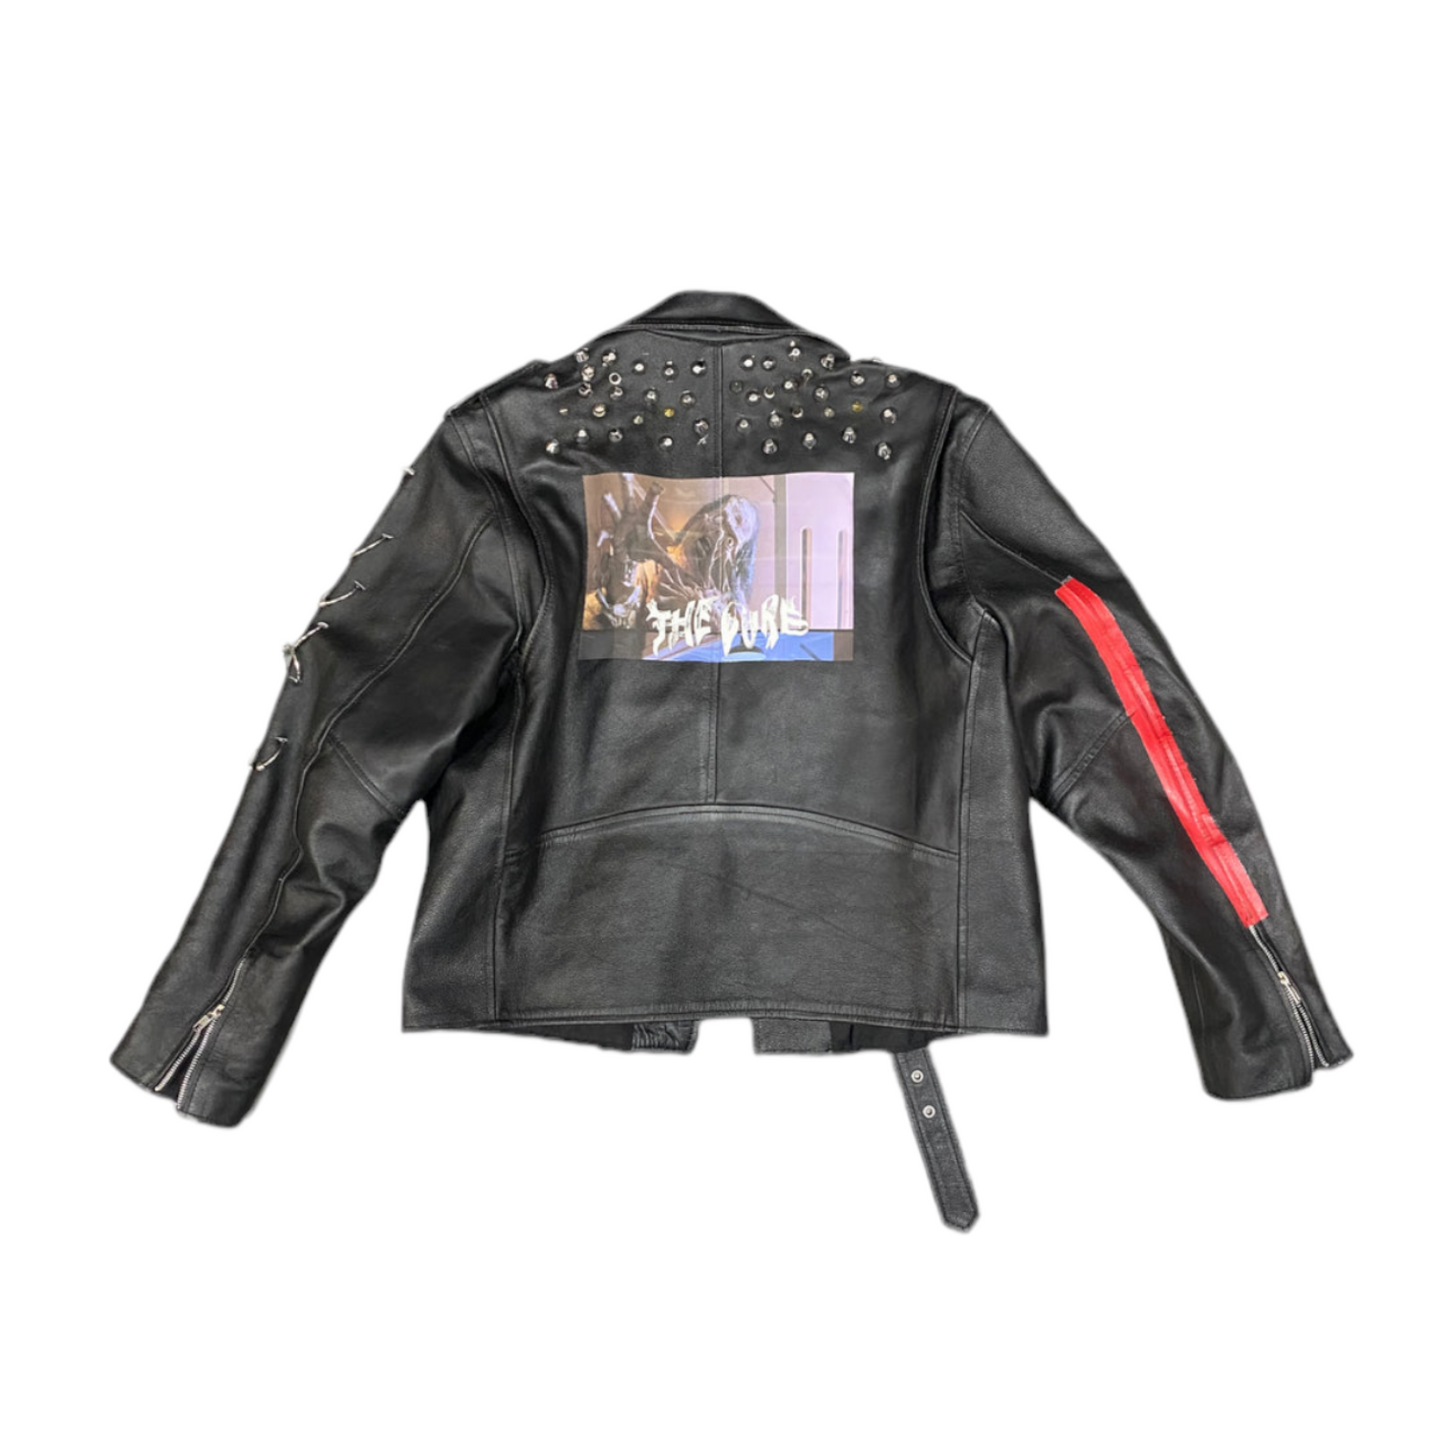 Toth 660 Leather jacket